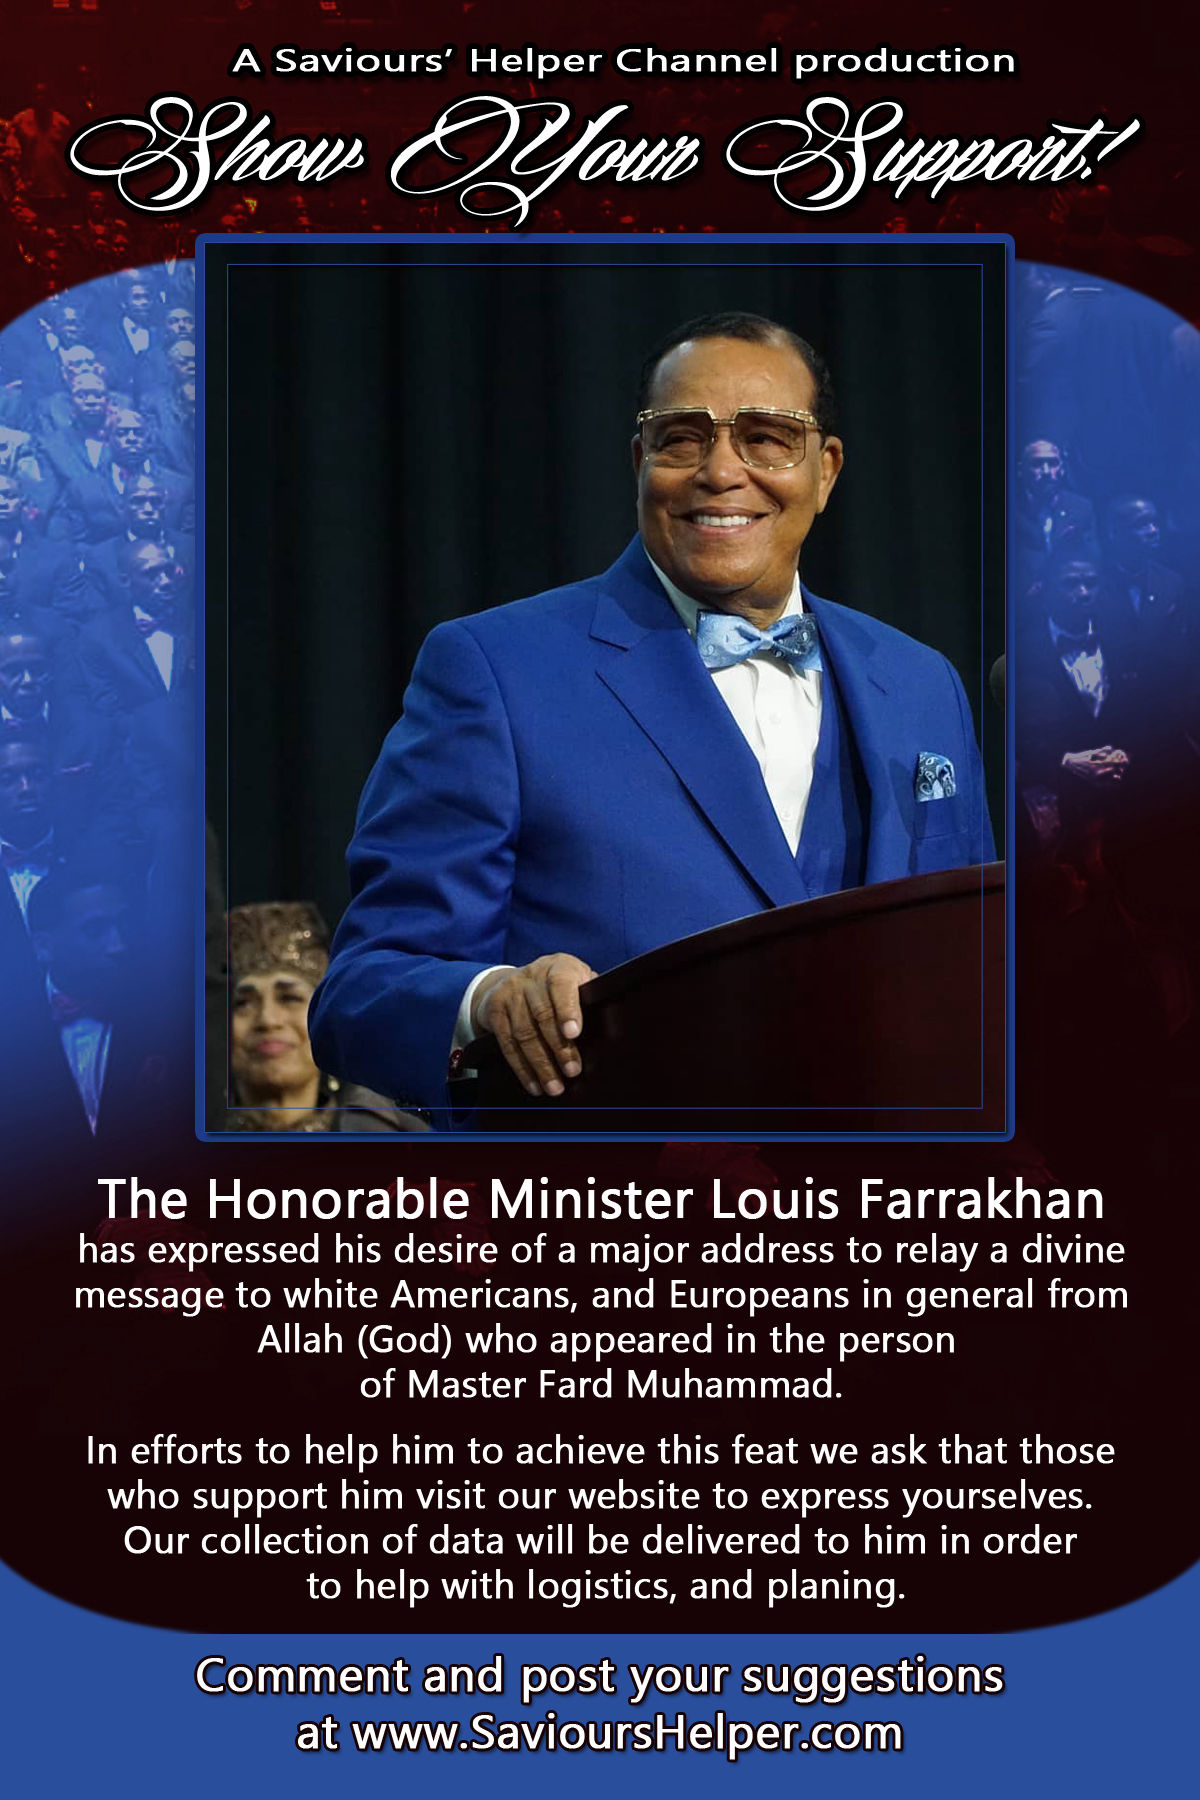 Support the Honorable Minister Louis Farrakhan